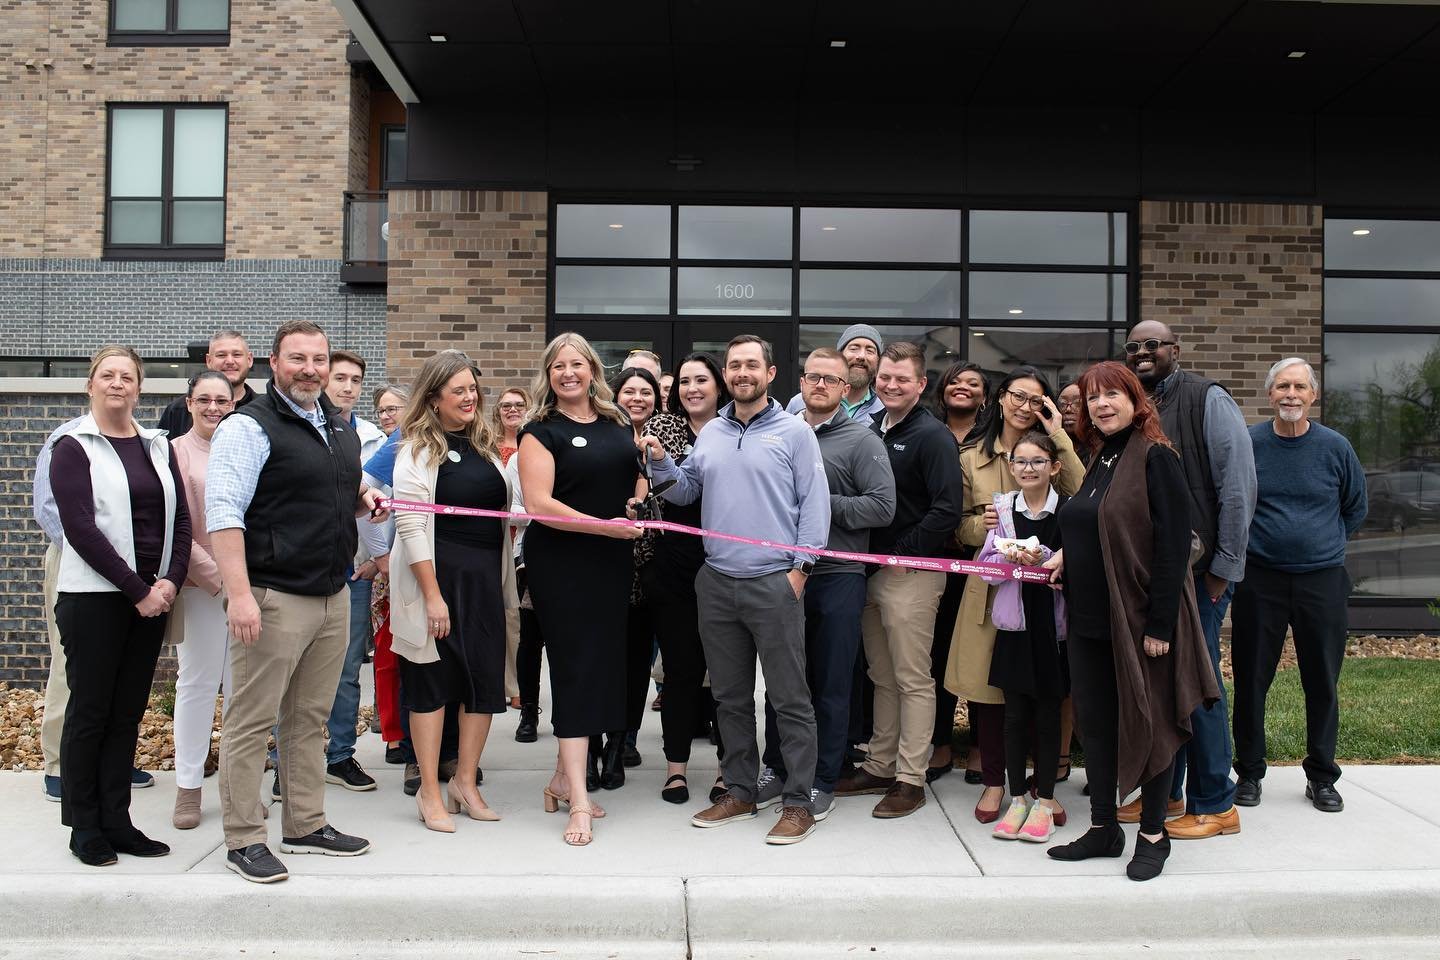 🎉✂️ Thank you @northlandchamber for joining us at The Darby at Briarcliff for our Ribbon Cutting &amp; Open House. Today we celebrate that we are now pre-leased over 50% and we are so grateful for the support that got us here. Huge thanks to our ama